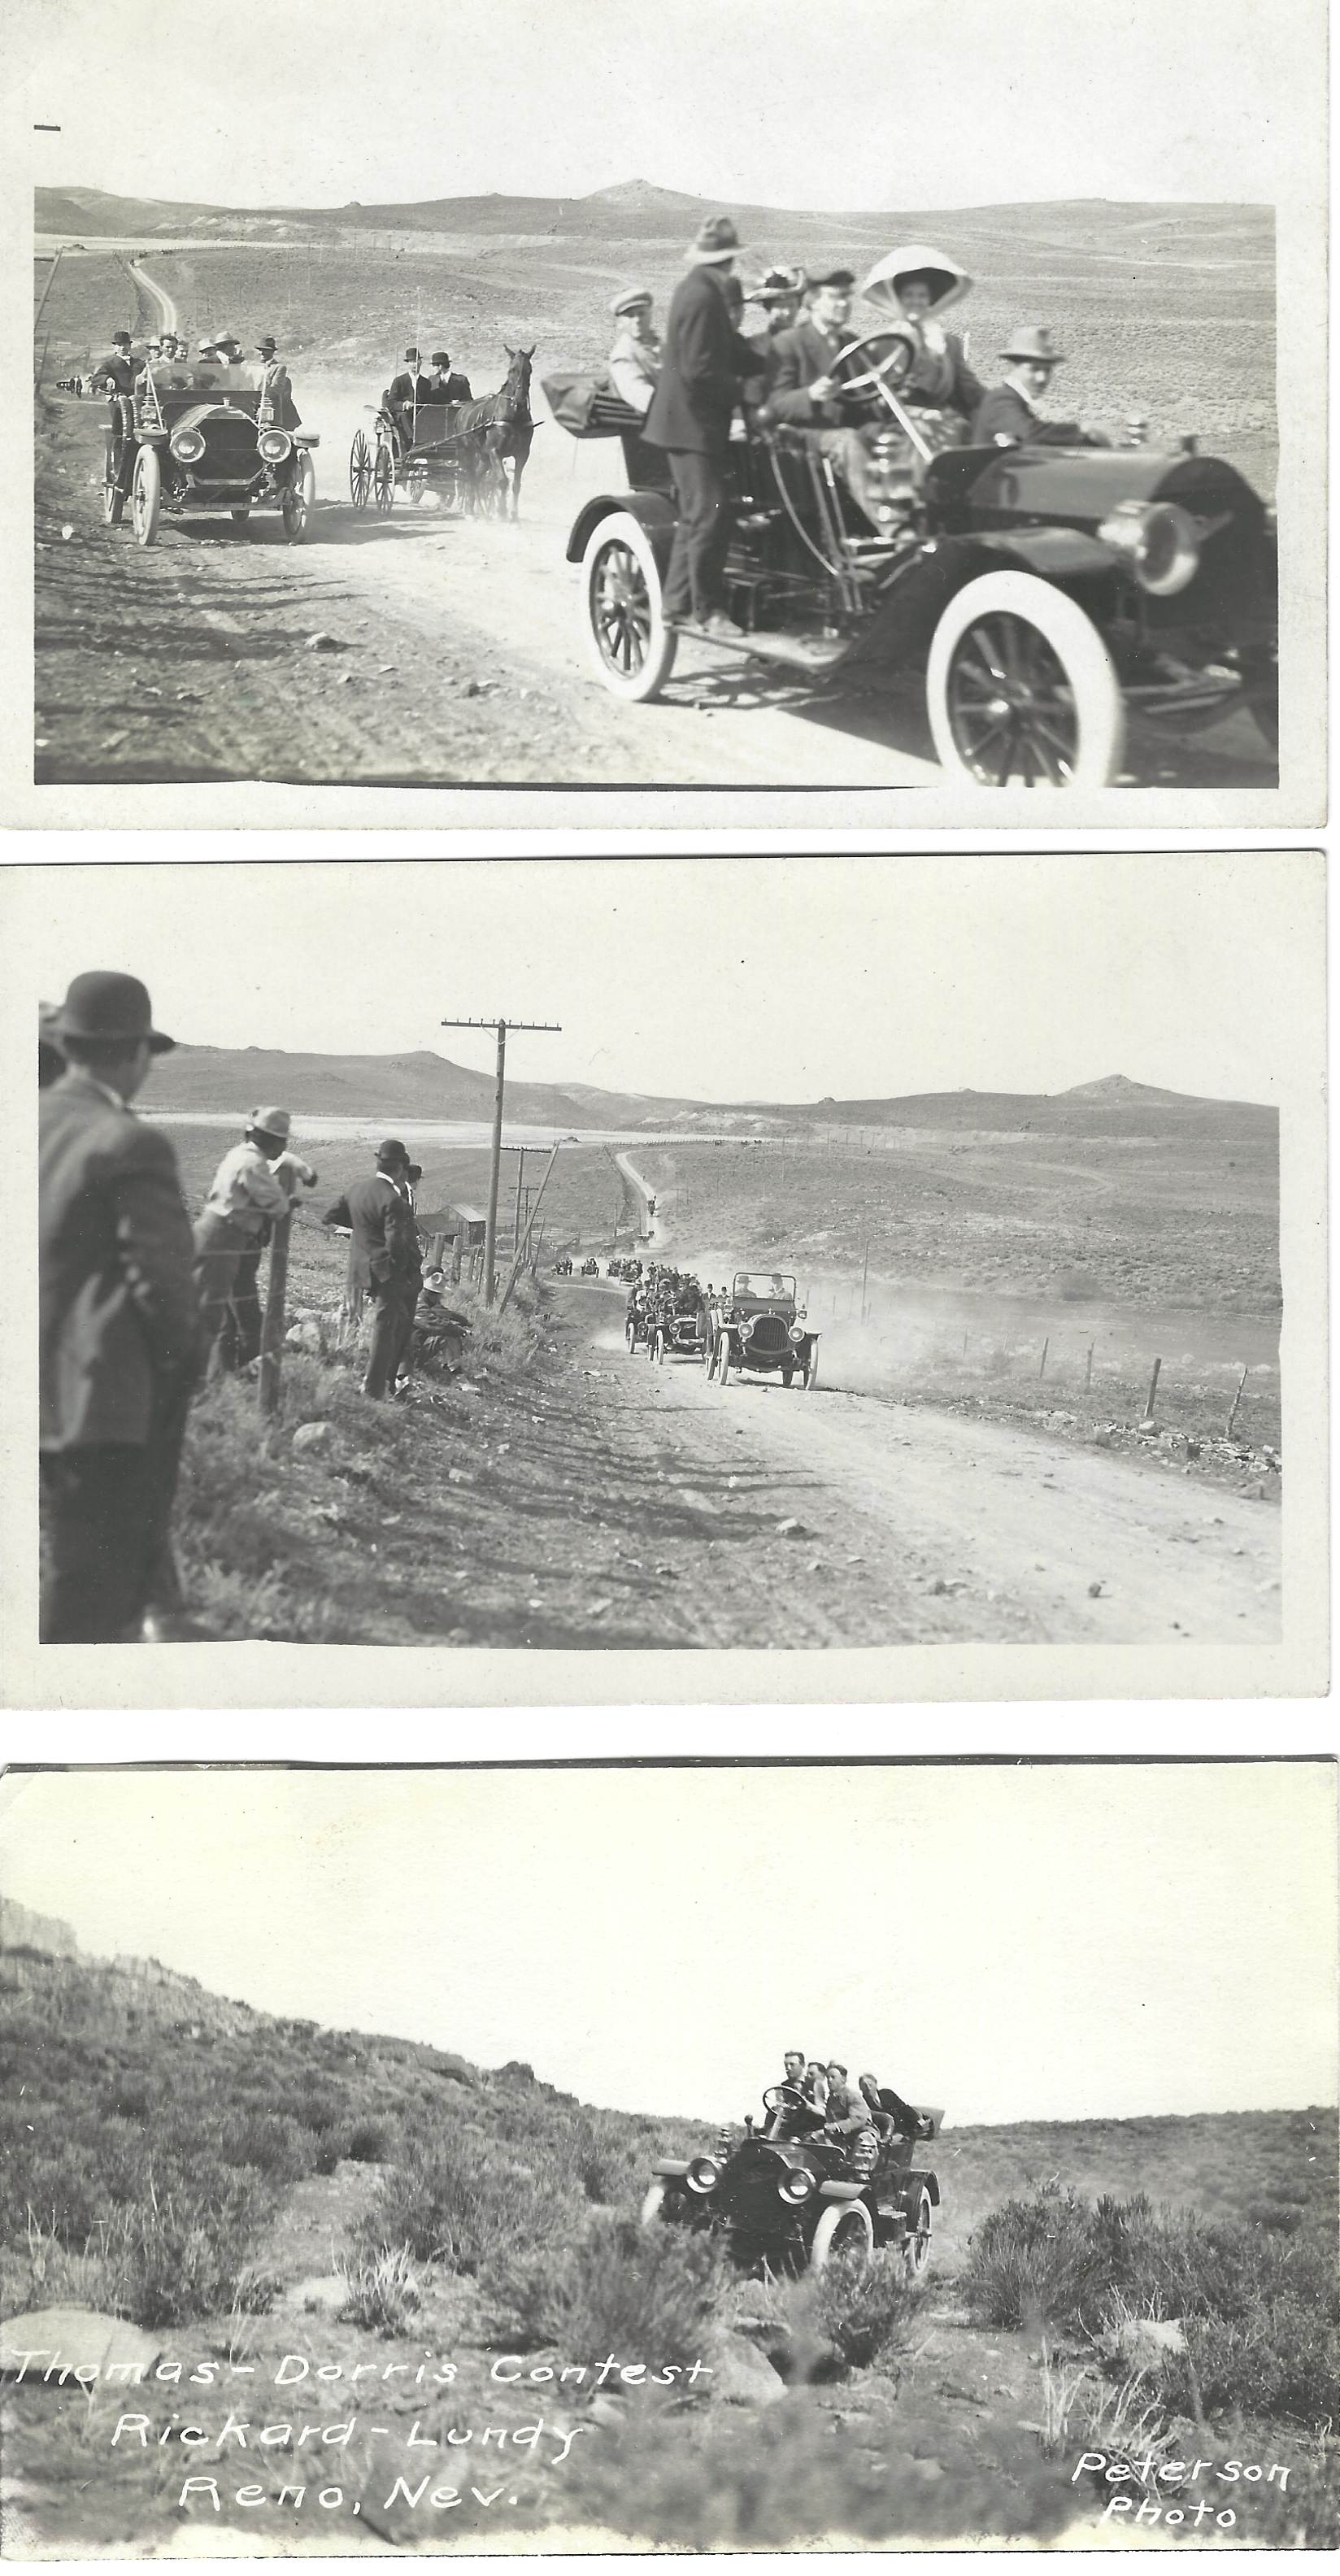 Photos of Bert Lundy and friends racing a Dorris automobile in Northern Nevada.